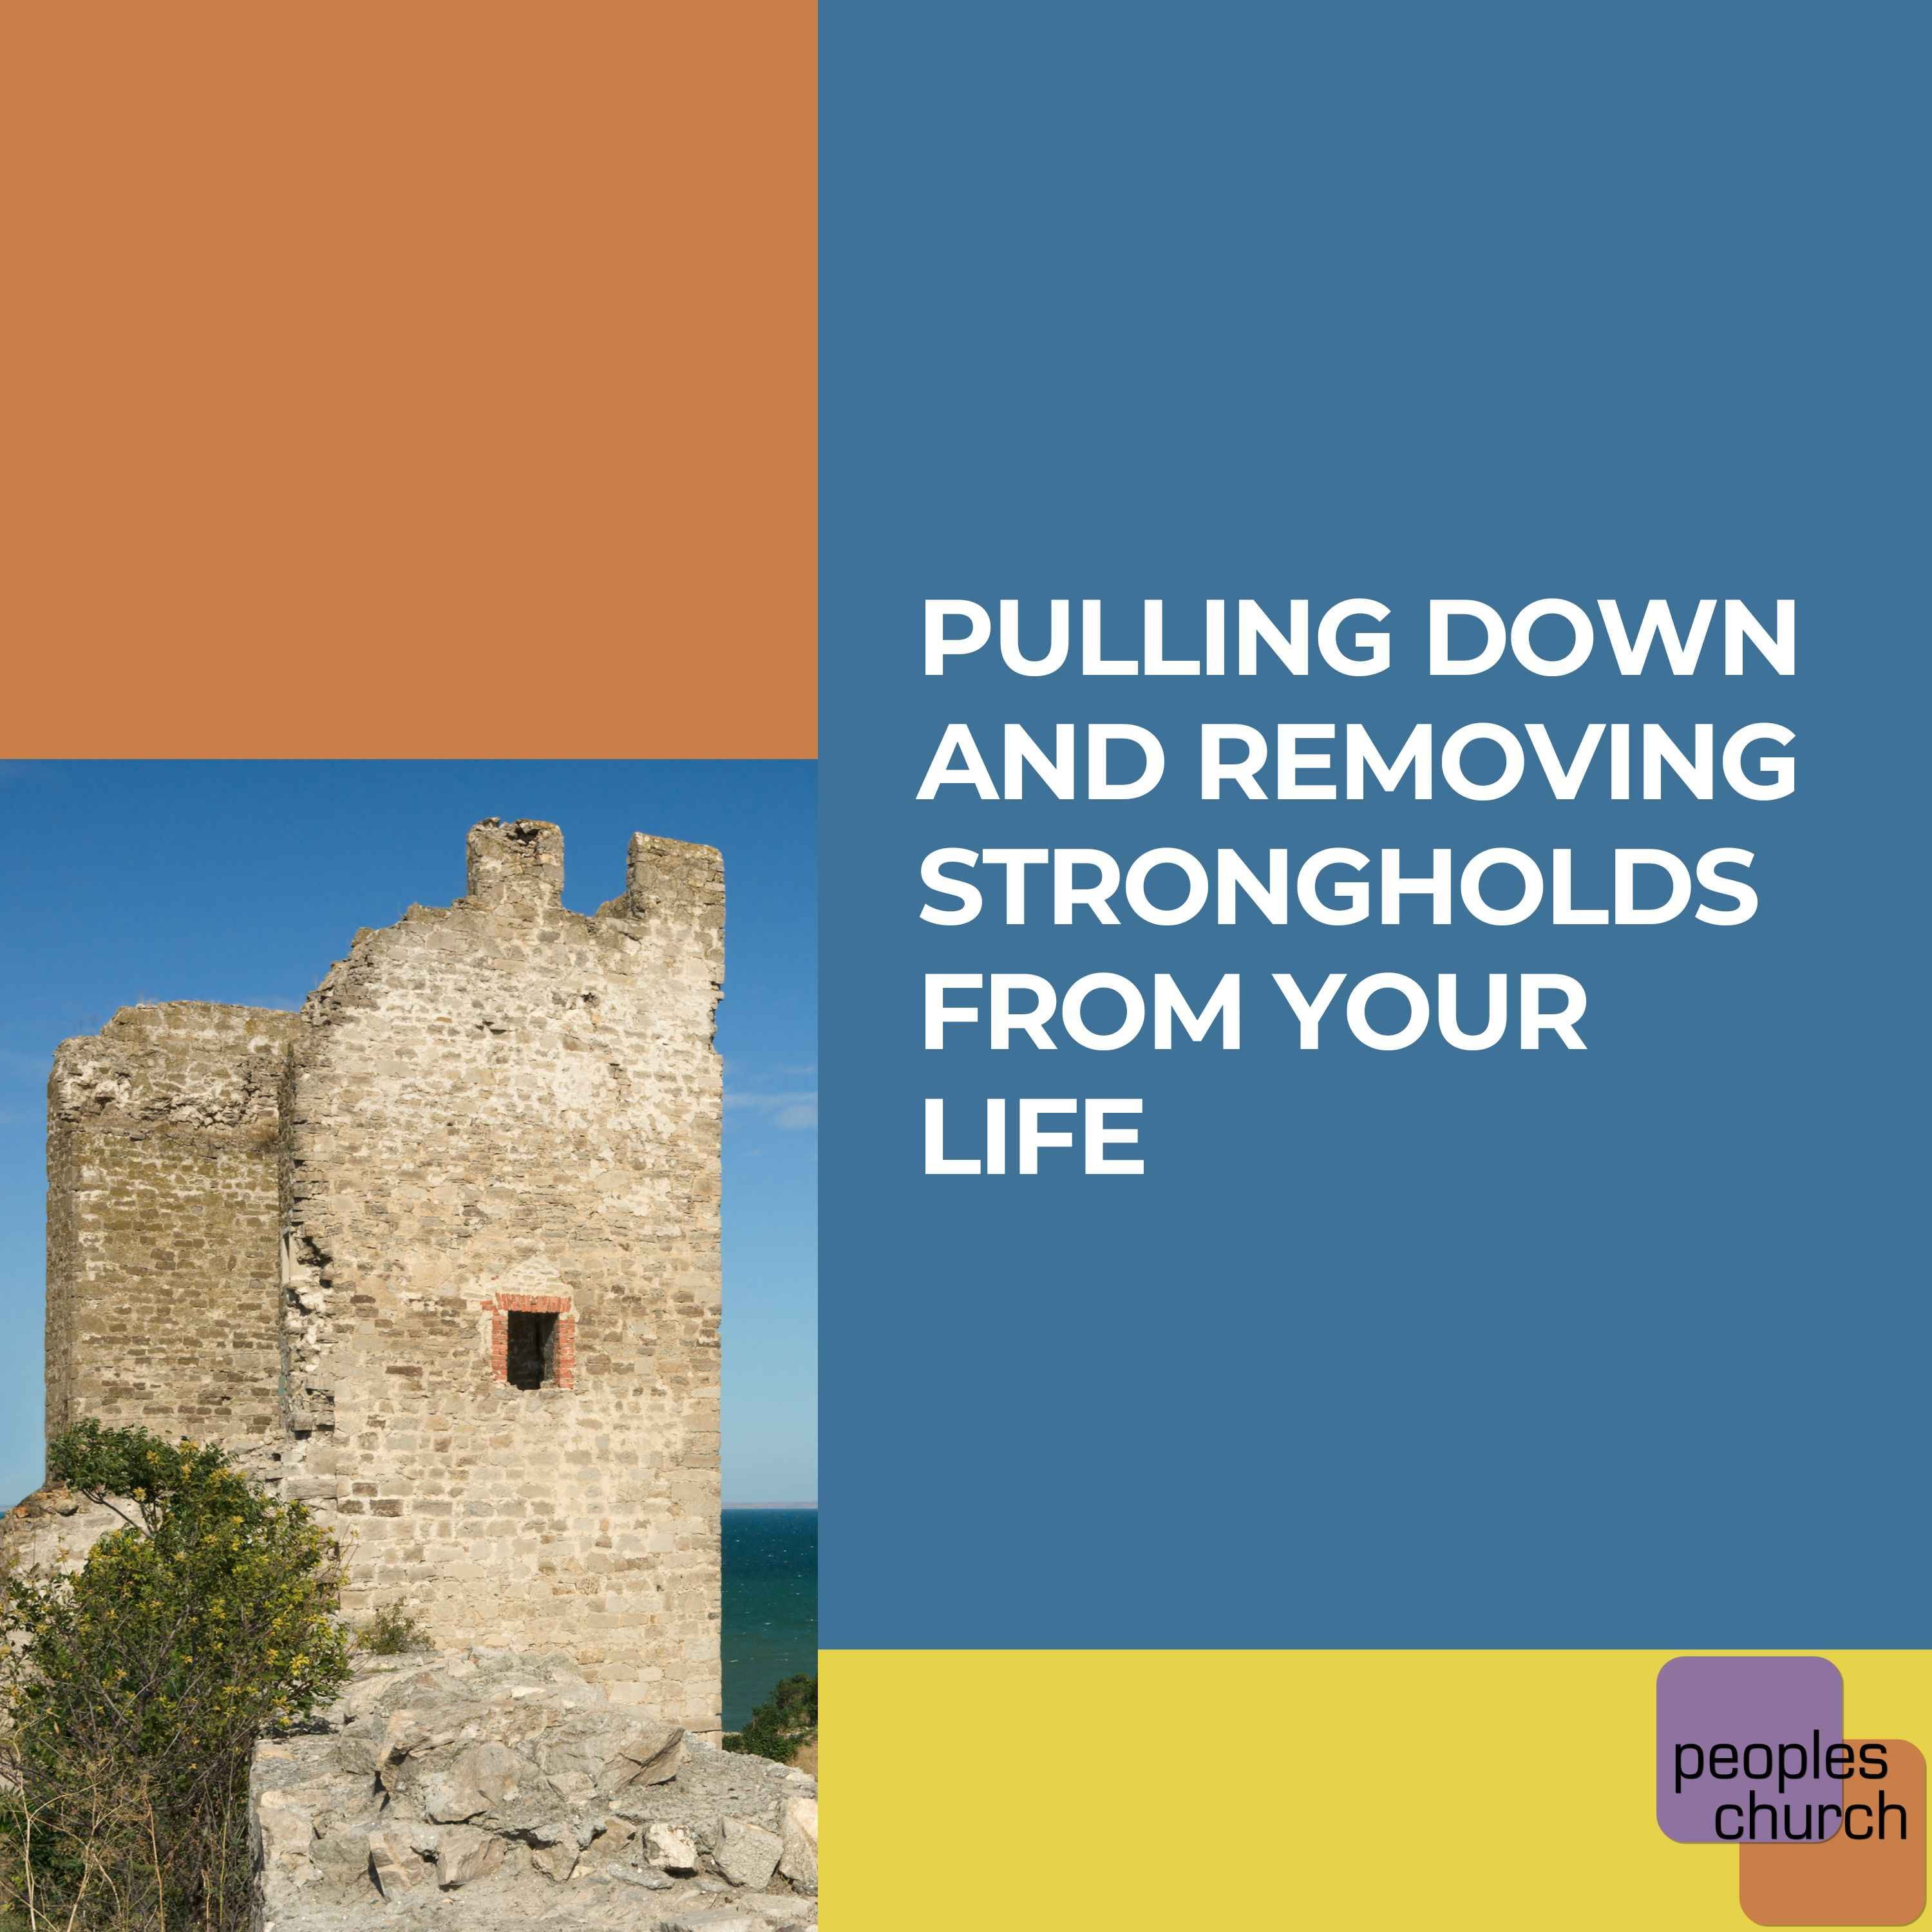 Pulling Down and Removing Strongholds from Your Life